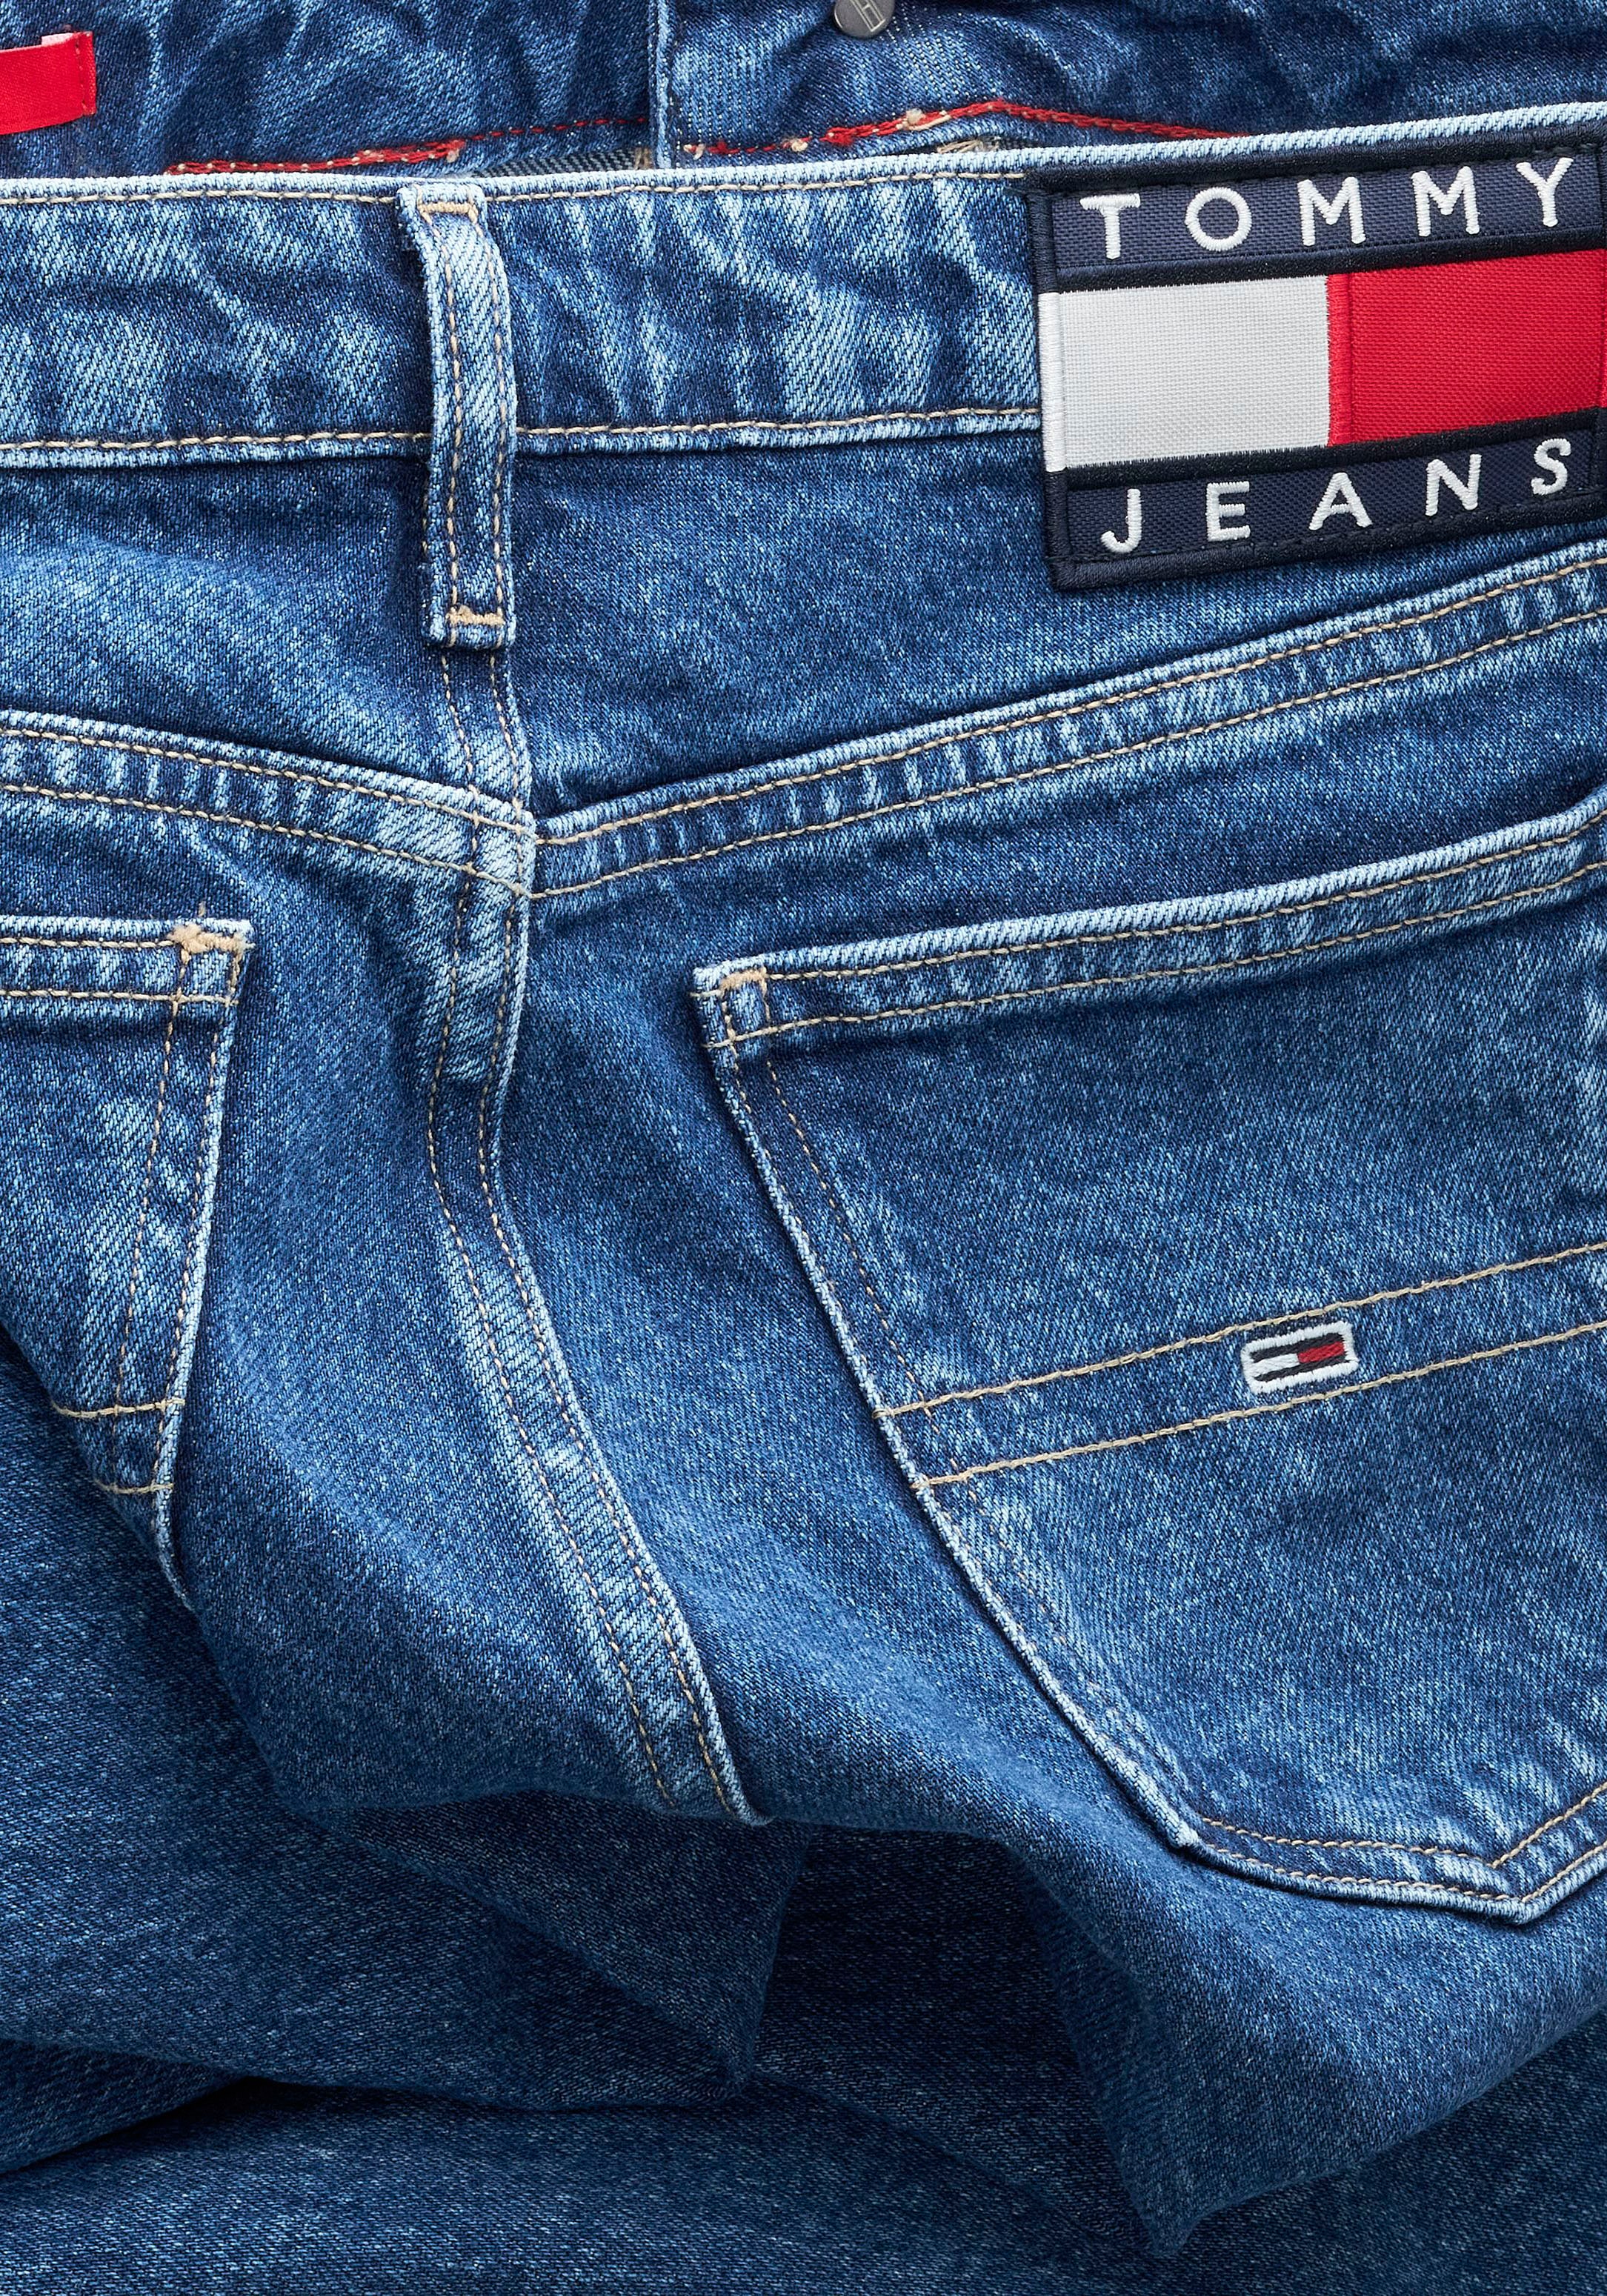 Tommy Jeans Schlagjeans, mit bei ♕ Jeans Logobadge Tommy